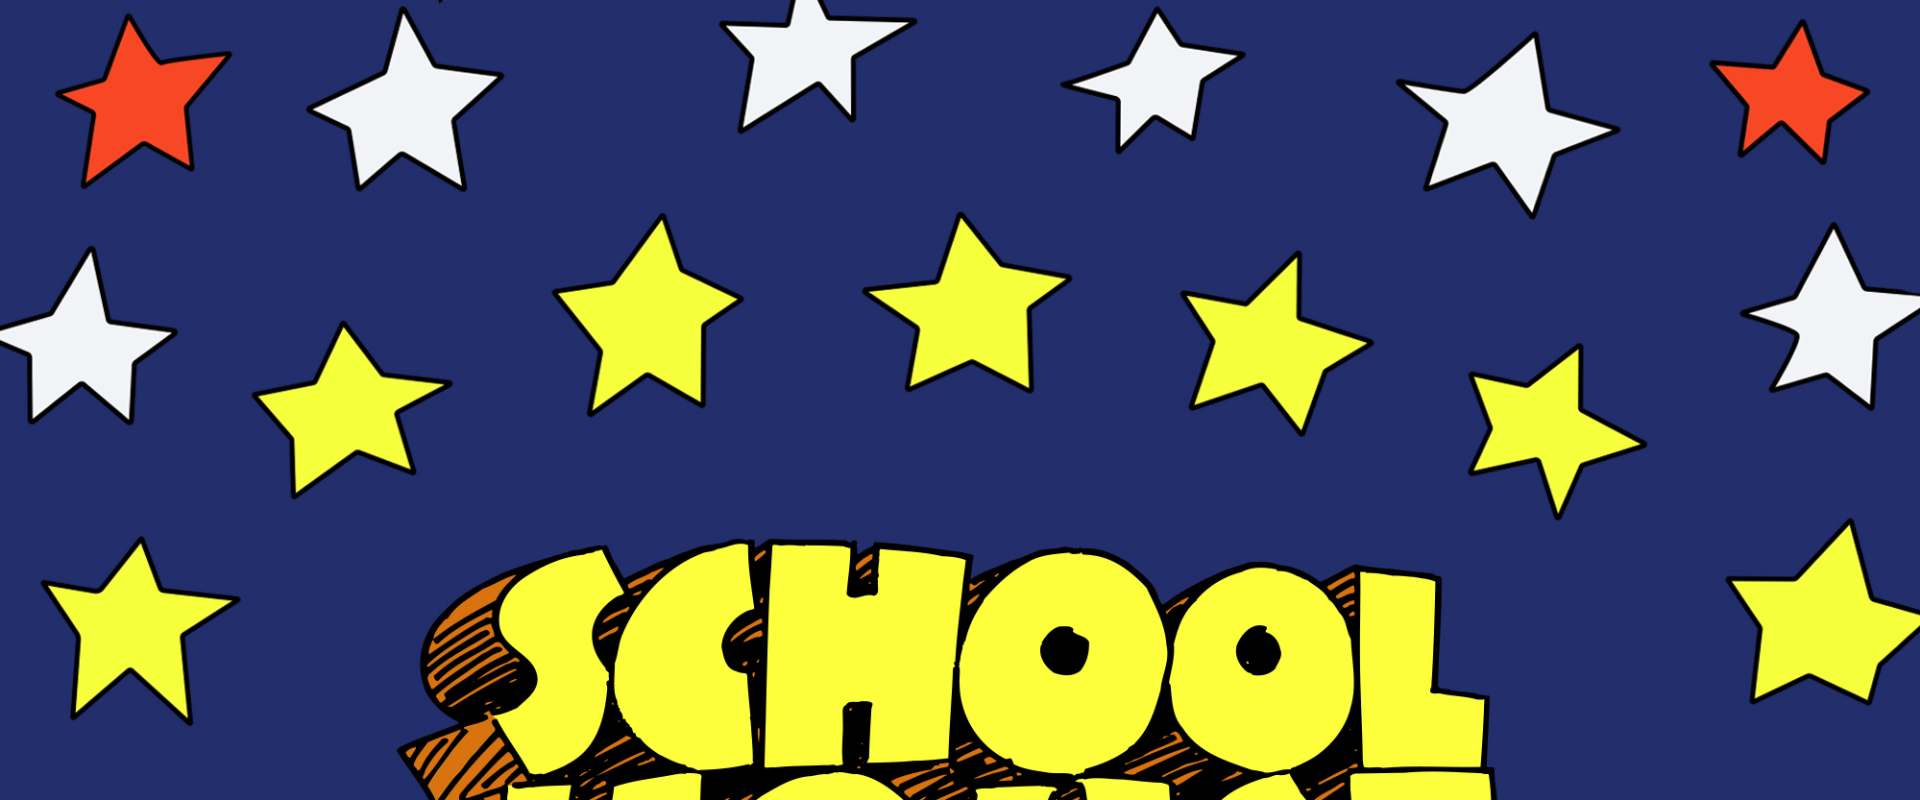 Schoolhouse Rock! 50th Anniversary Singalong background 2